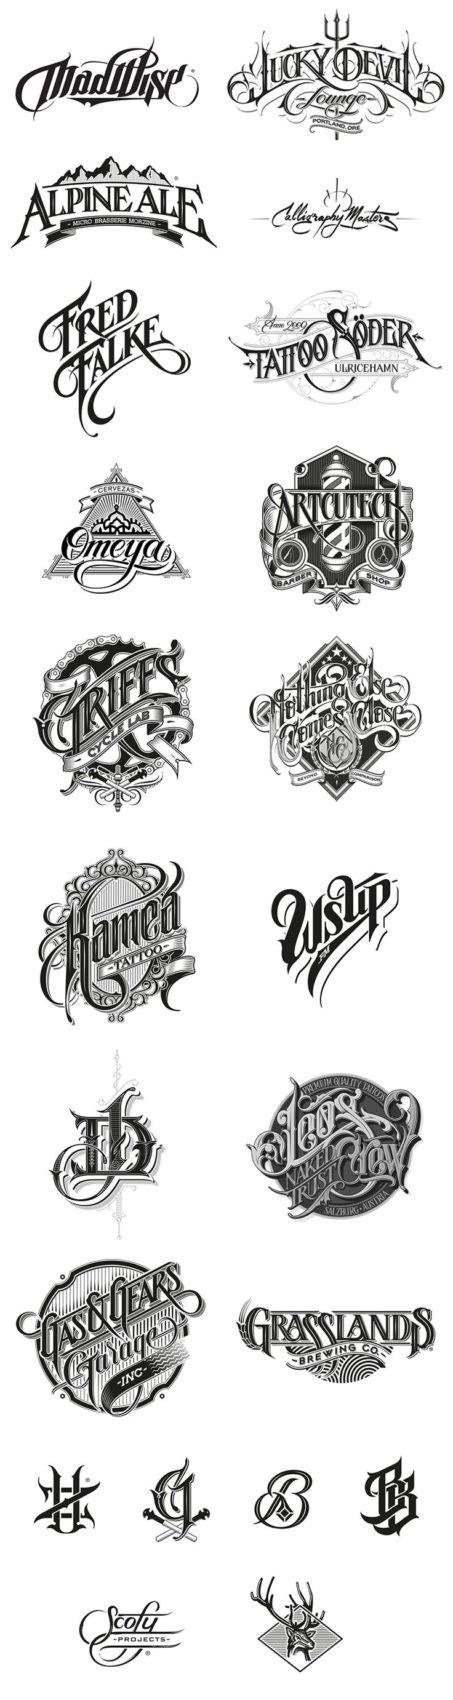 Awesome Lettering Font Design For Your Own Tattoo 99inspiration